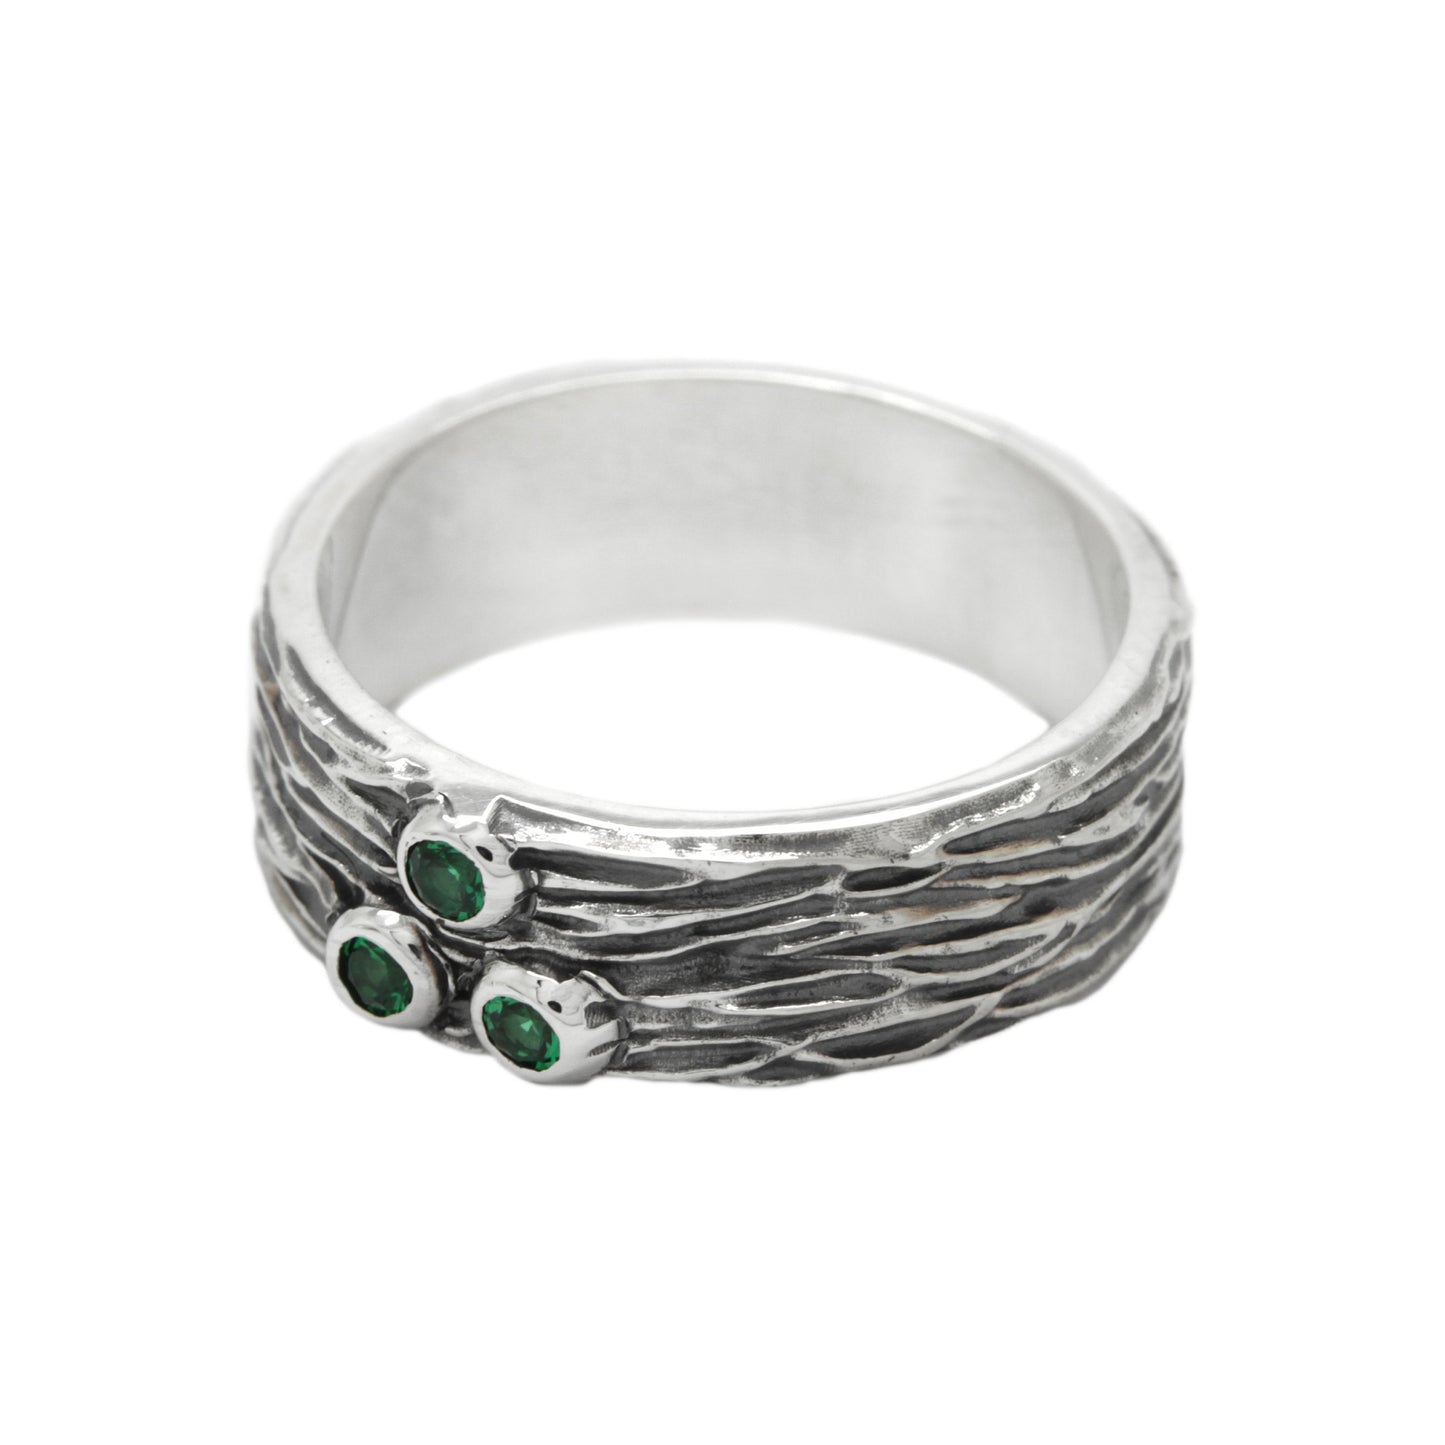 Woody Style Engagement Silver Ring with Green Gemstones